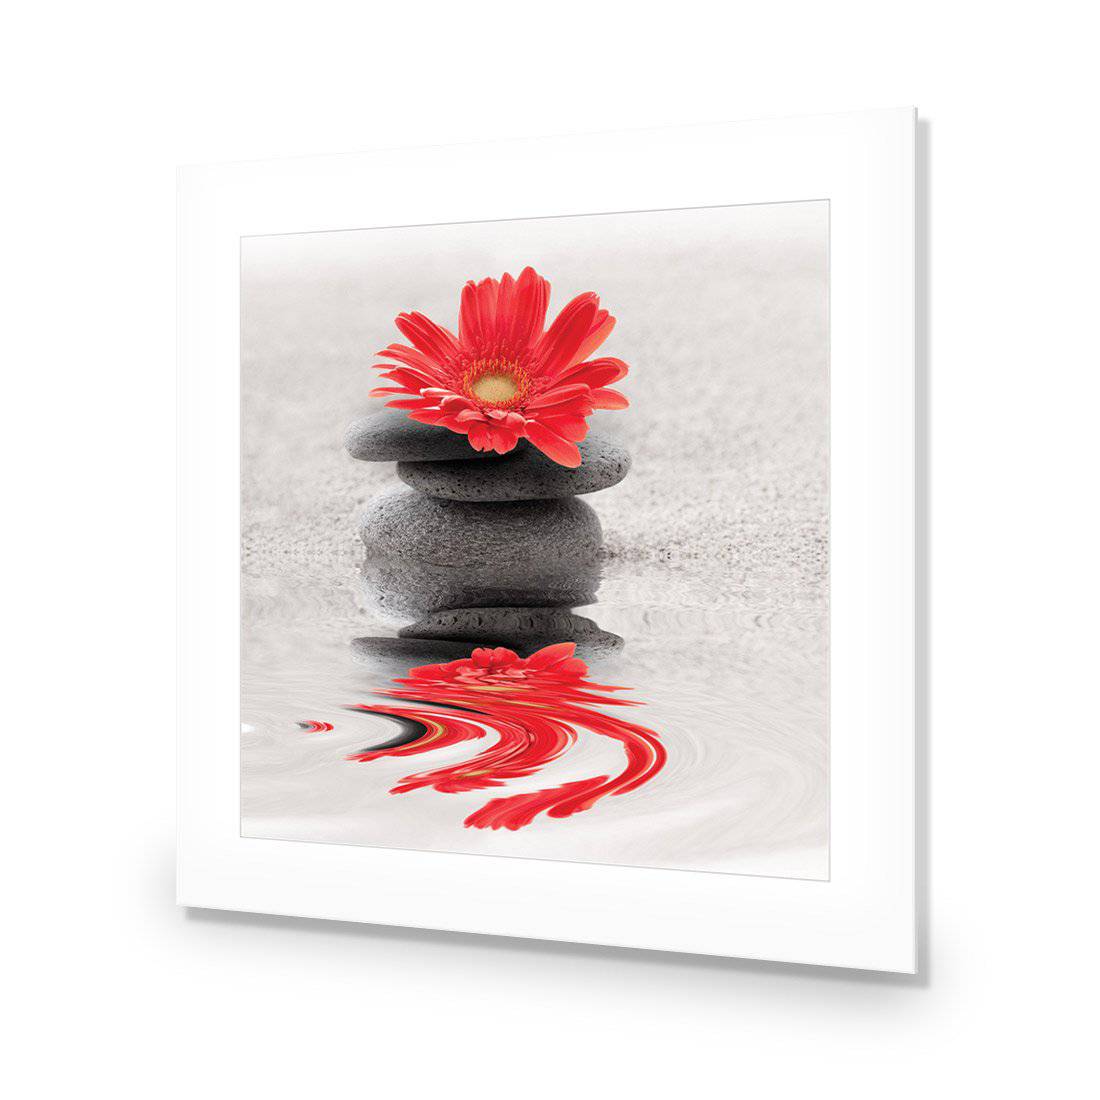 Red Flower Reflection, Square-Acrylic-Wall Art Design-With Border-Acrylic - No Frame-37x37cm-Wall Art Designs